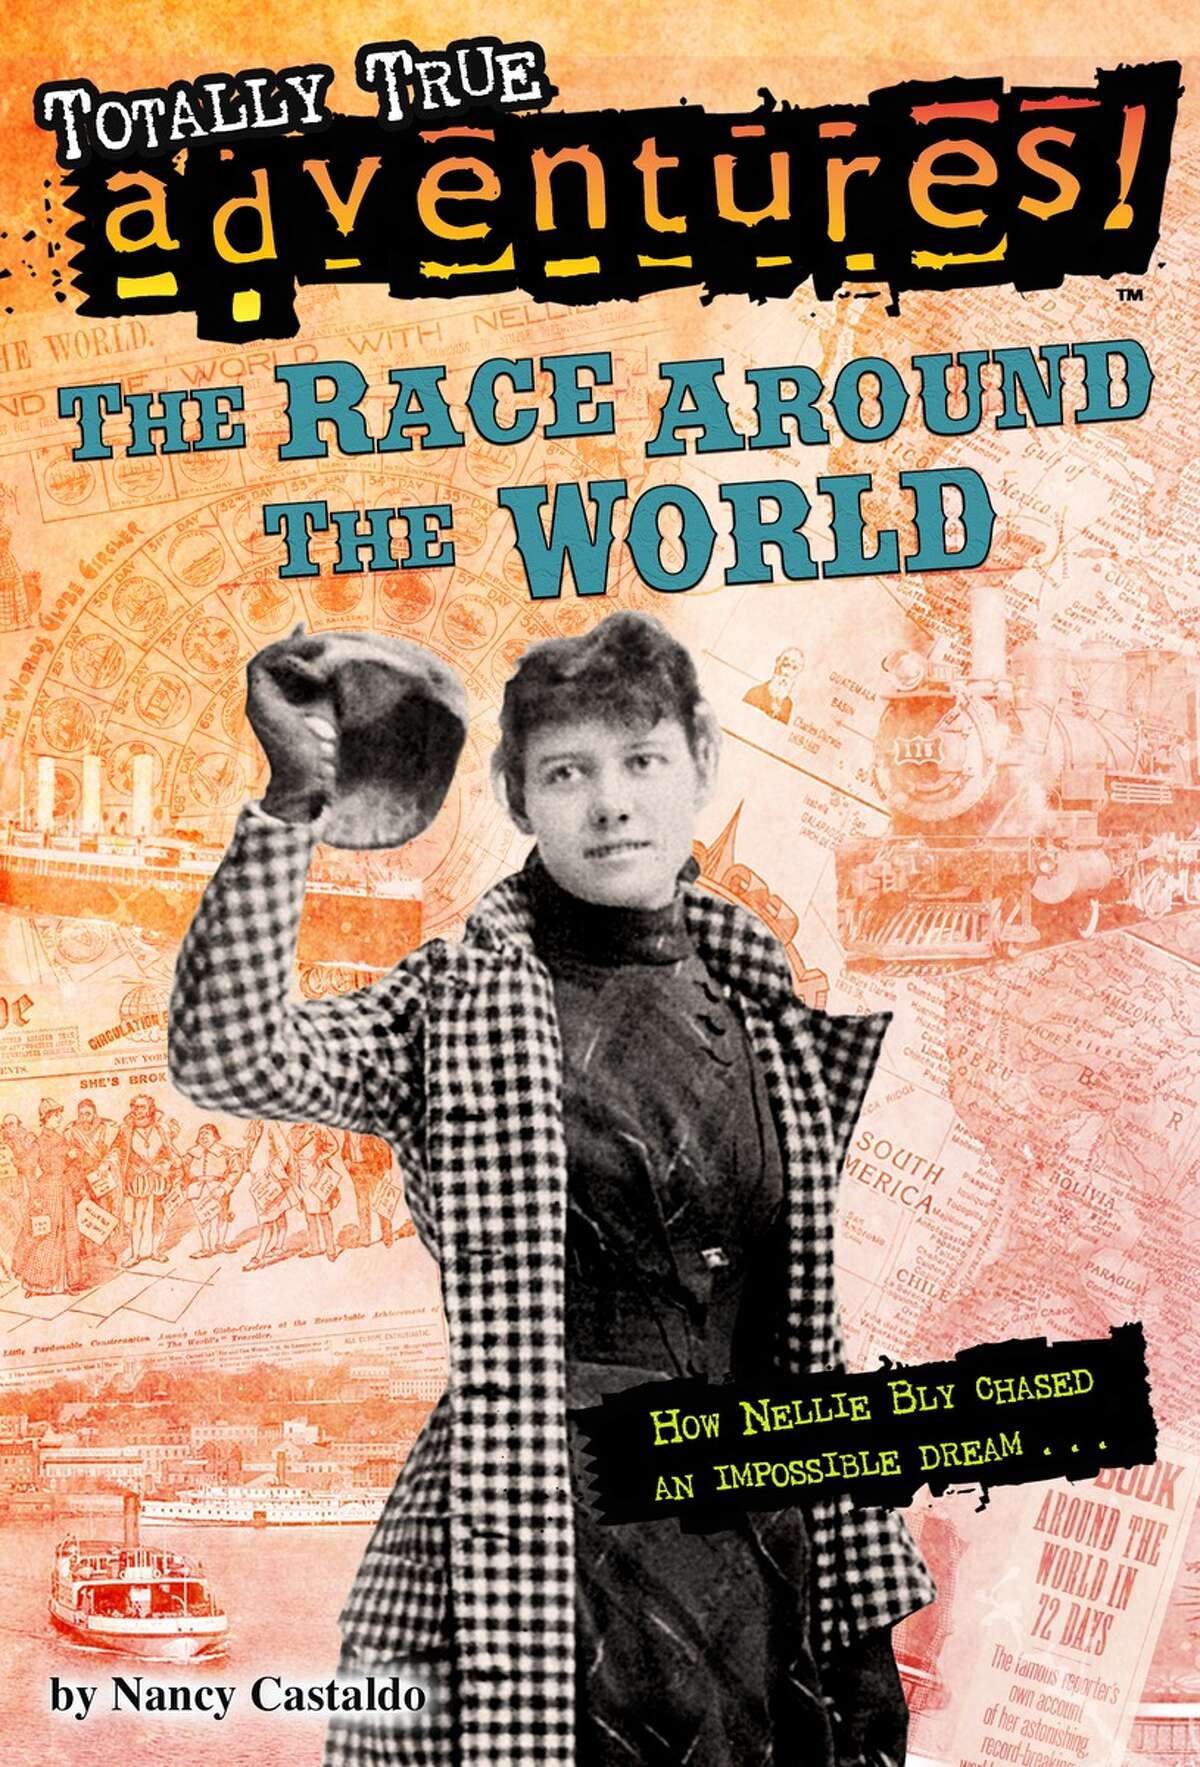 Nancy Castaldo, "The Race Around the World: How Nellie Bly Chased an Impossible Dream" Random House, 2015 Castaldo has lived in Columbia County for 30 years, and is the author of numerous nonfiction books for young readers. This chapter book for readers ages 7 to 10 is part of a series called "Totally True Adventures!" It tells the story of the 19th-century woman journalist who read Jules Verne's novel "Around the World in Eighty Days" and then set out to travel around the world in real life in less than 80 days. People doubted that it could be done, particularly by a woman. Other recent books by Castaldo include "Sniffer Dogs: How Dogs (and Their Noses) Save the World" (Houghton Mifflin Harcourt, 2014). (Courtesy of the author)